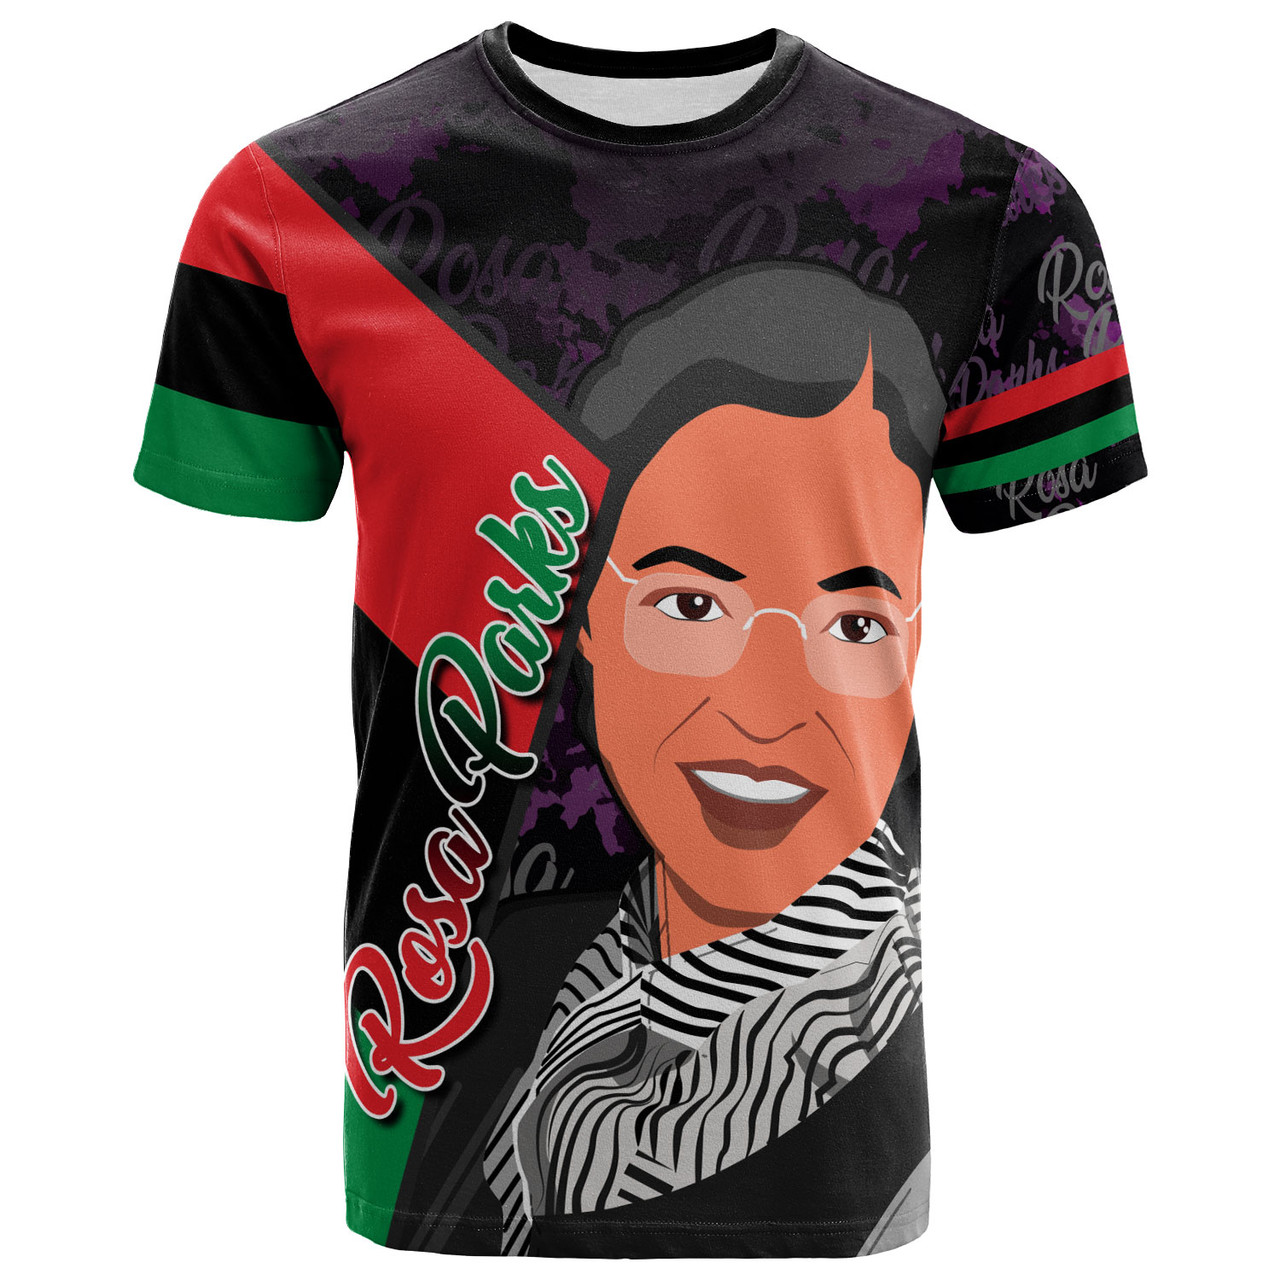 Black History Month T-Shirt - Rosa Parks Civil Rights Leader With Pan Africa Flag T-Shirt